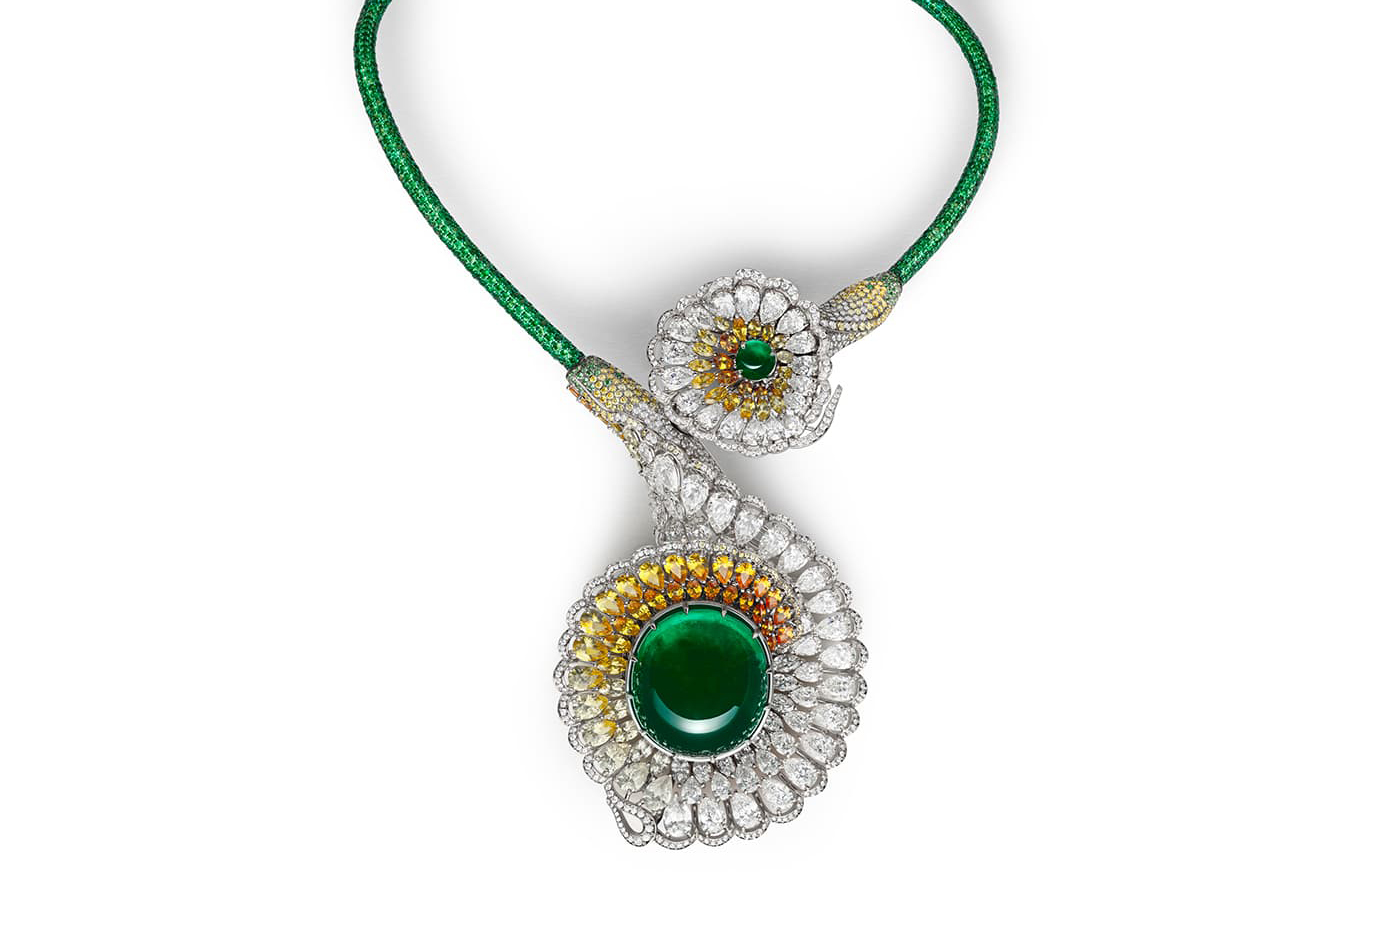 Chopard Red Carpet 2019 collection 'Divine Necklace' open ended choker with 111ct cabochon emerald, yellow and colourless diamonds, sapphires and tsavorites 